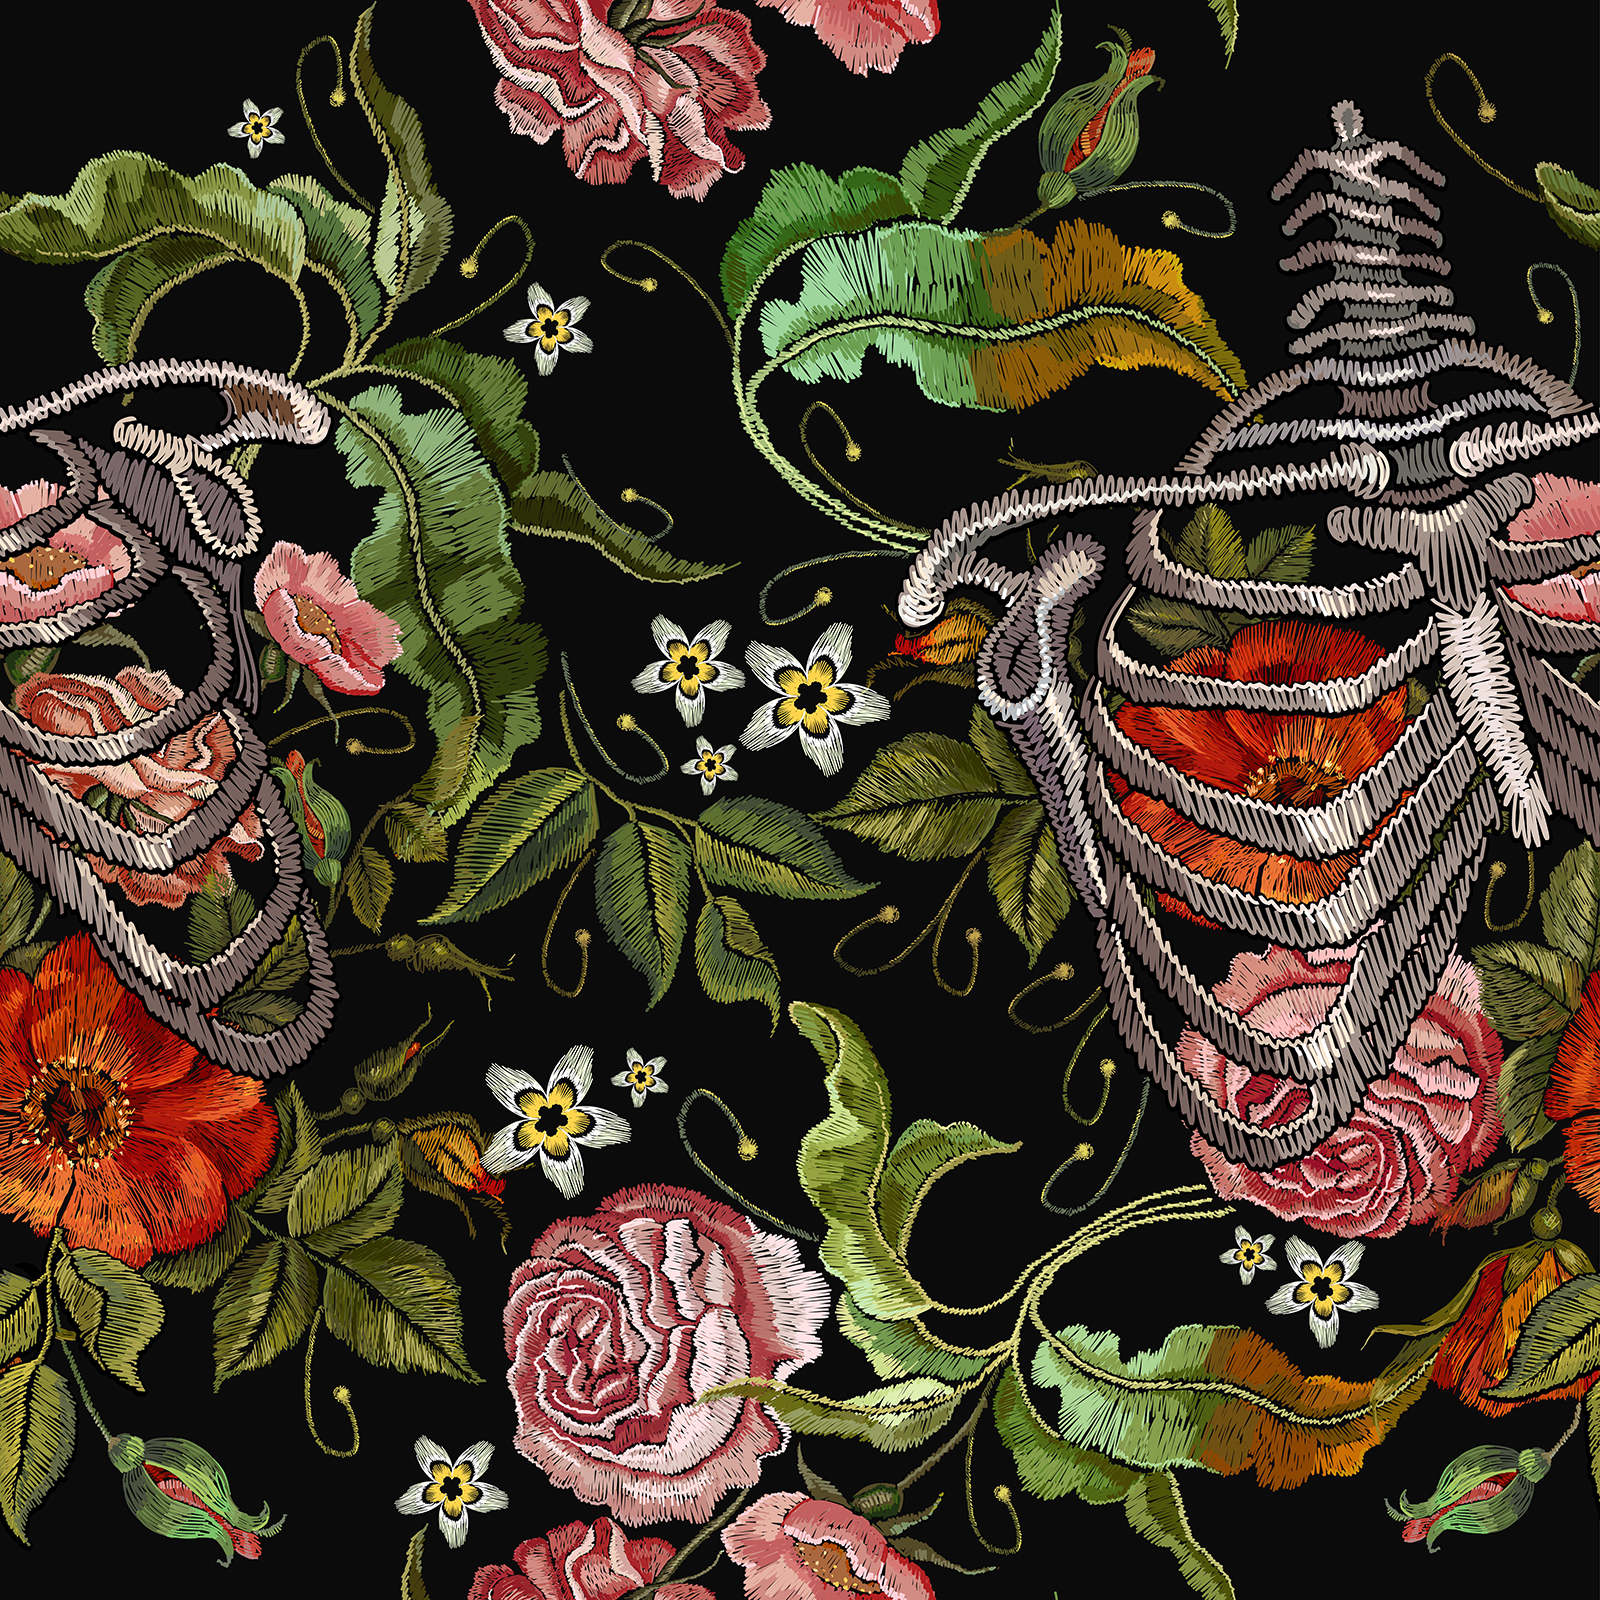 A colorful embroidered tapestry of flowers is interwoven among rib cages